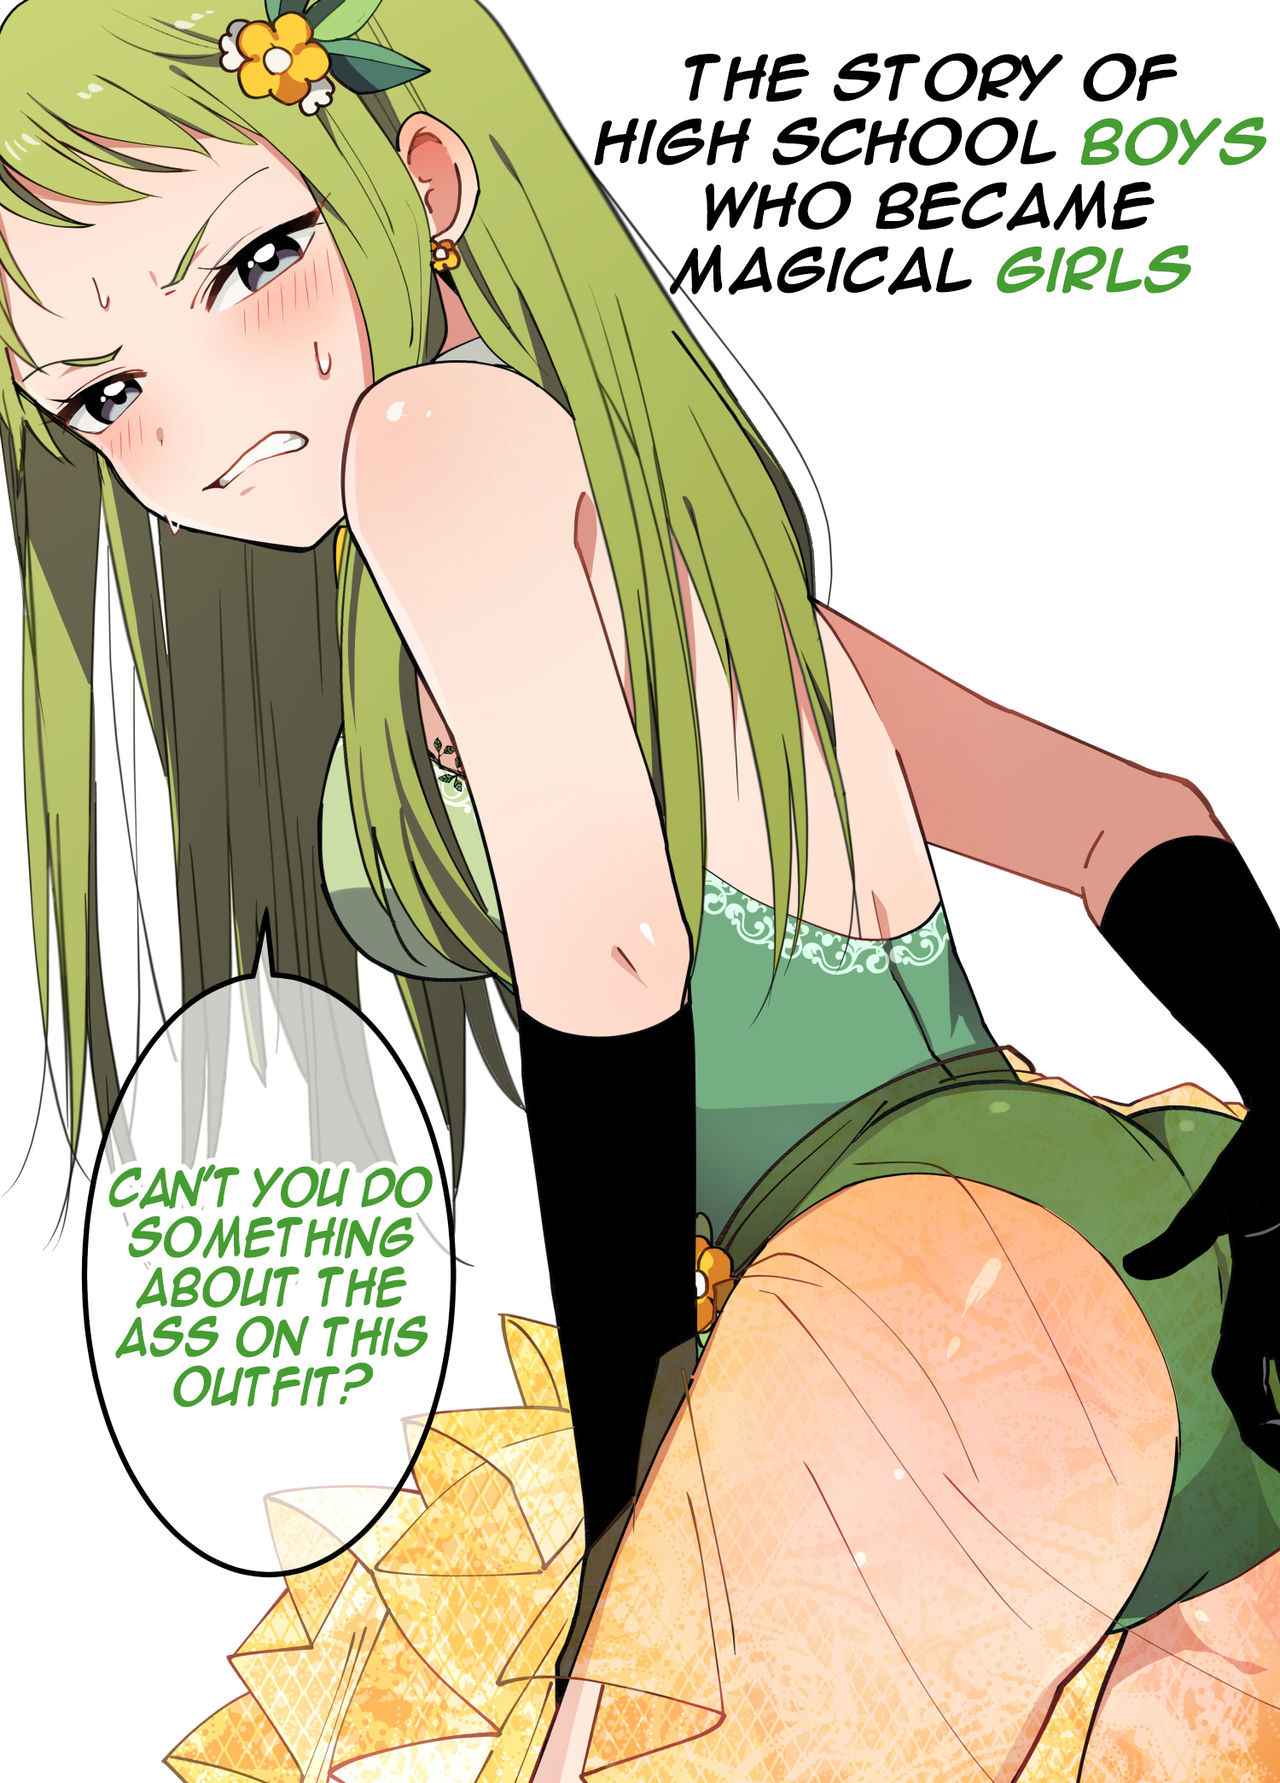 The Story of High School Boys Who Became Magical Girls Vol. 1 Ch. 0 Prequel